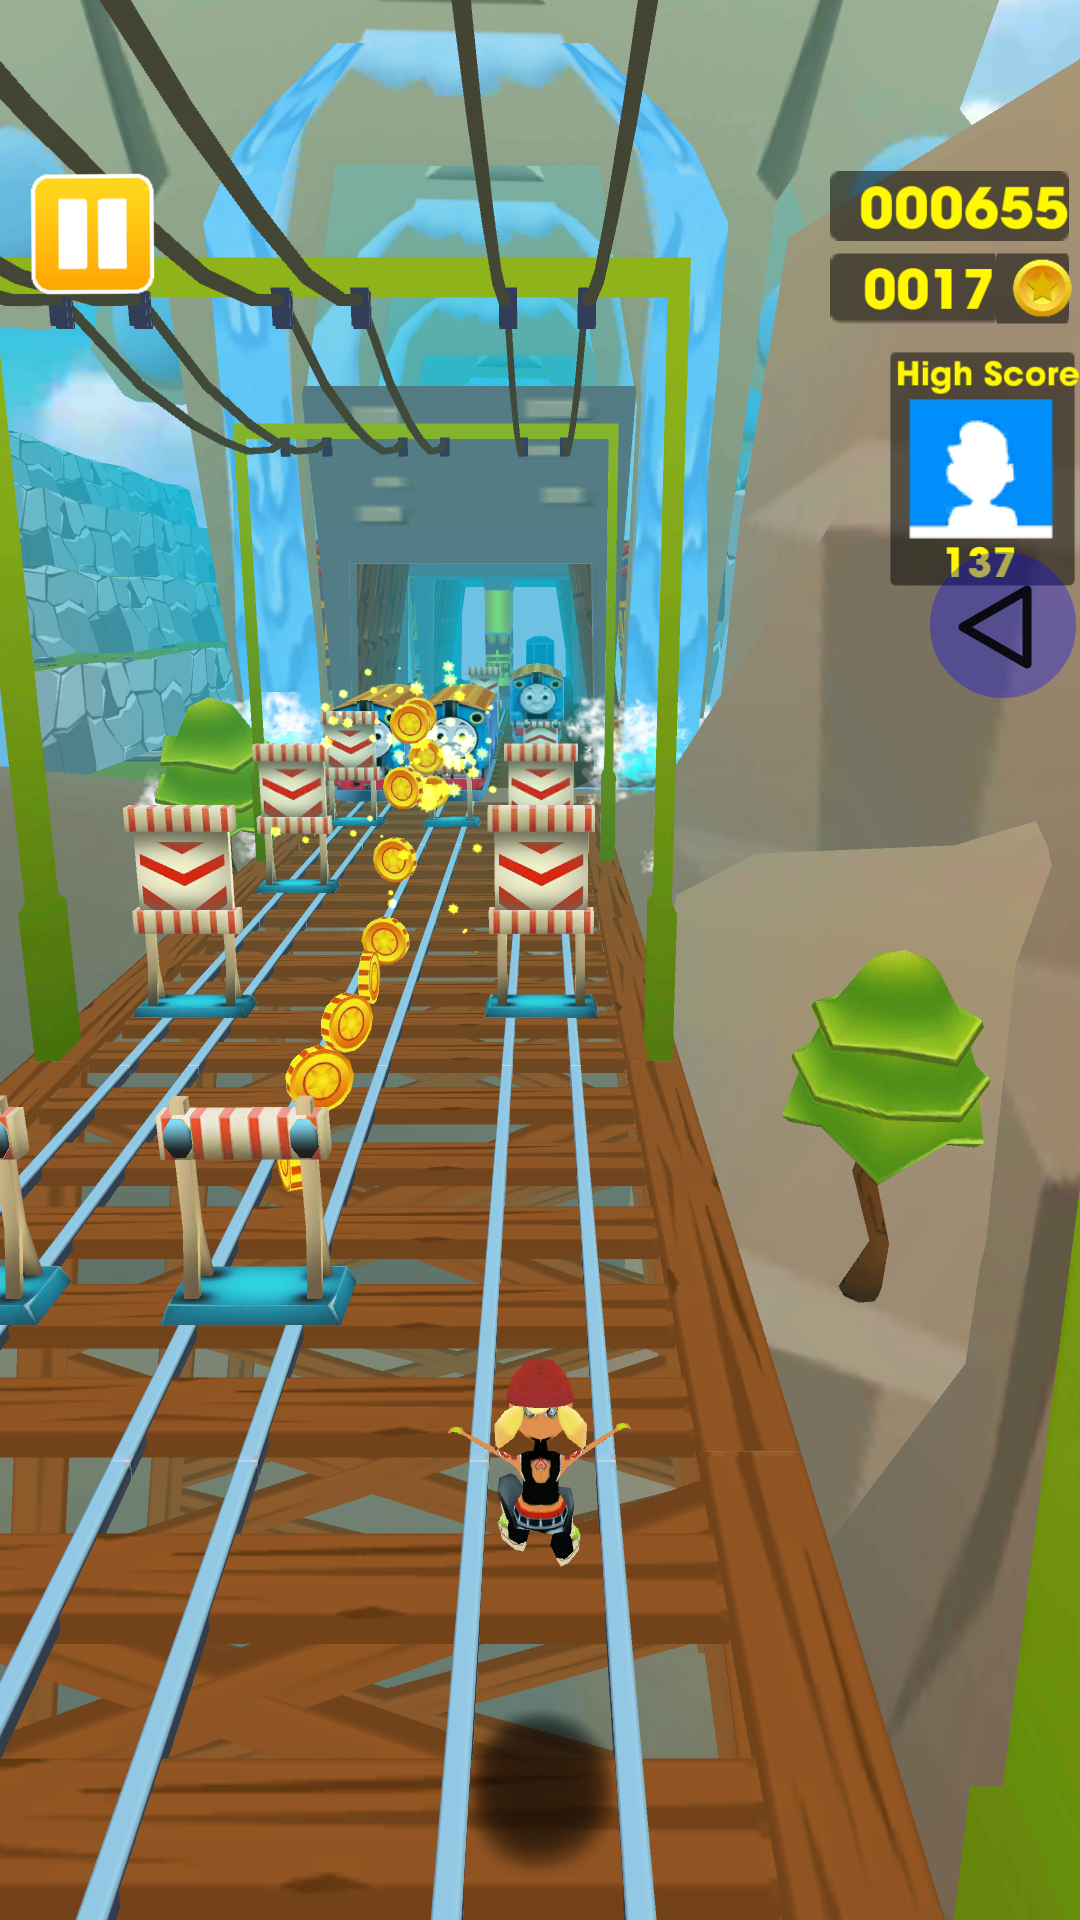 SUBWAY SURFERS RUNNING TOGETHER LEVEL 1 